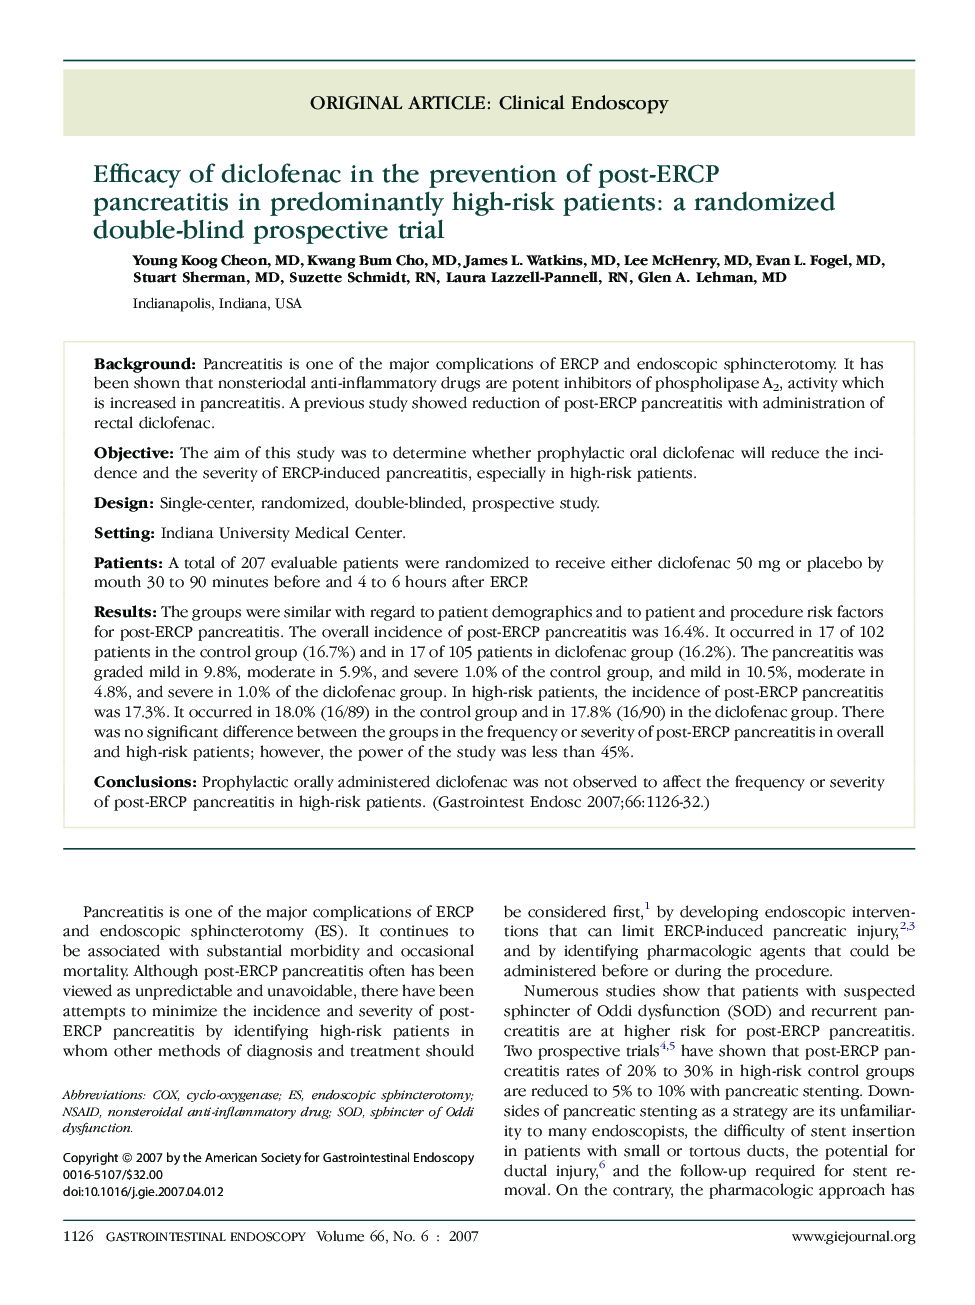 Efficacy of diclofenac in the prevention of post-ERCP pancreatitis in predominantly high-risk patients: a randomized double-blind prospective trial